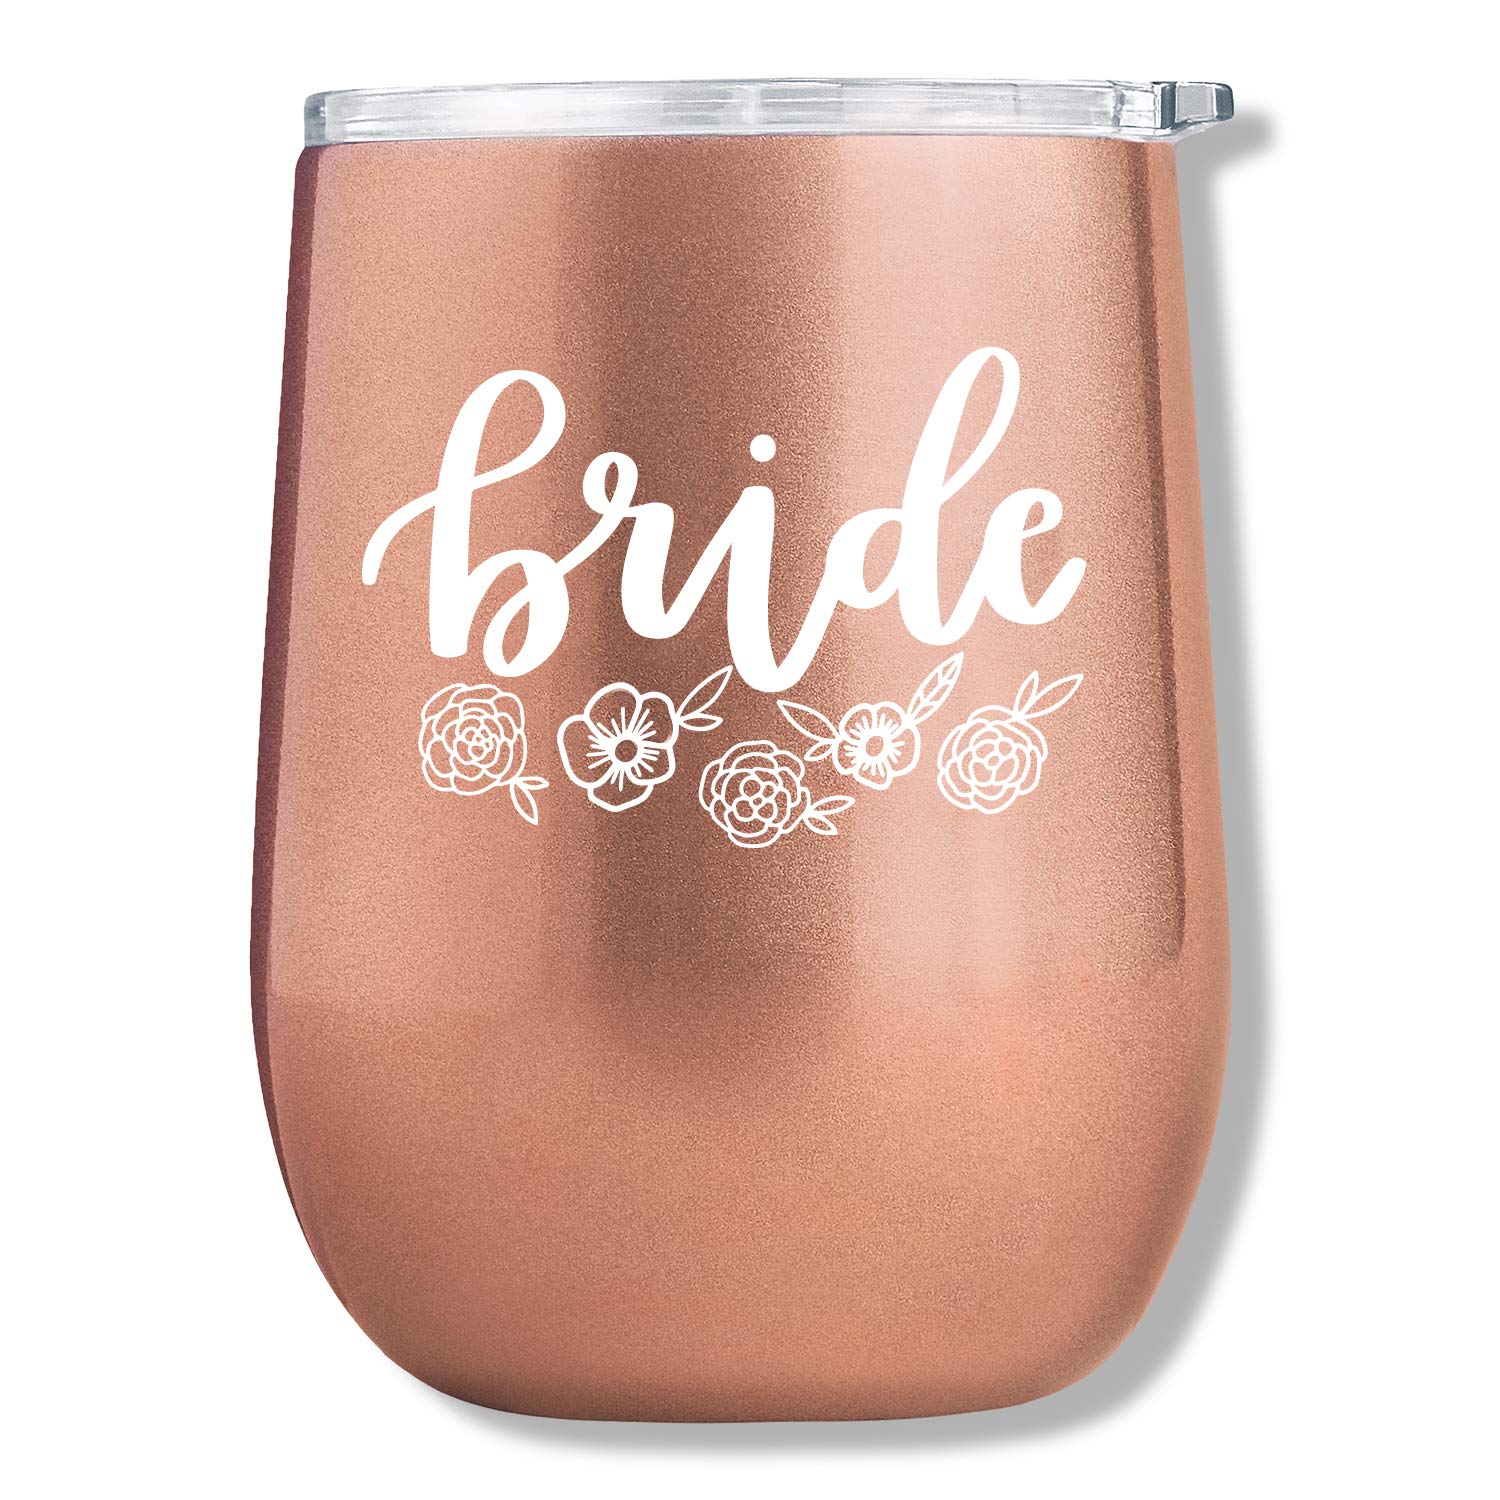 Book Cover xo, Fetti Bride Wine Tumbler Gift | White + Rose Gold 12oz Glossy Stainless Steel, Bachelorette Party Decorations Cups + Stemless Bridal Shower, Engagement